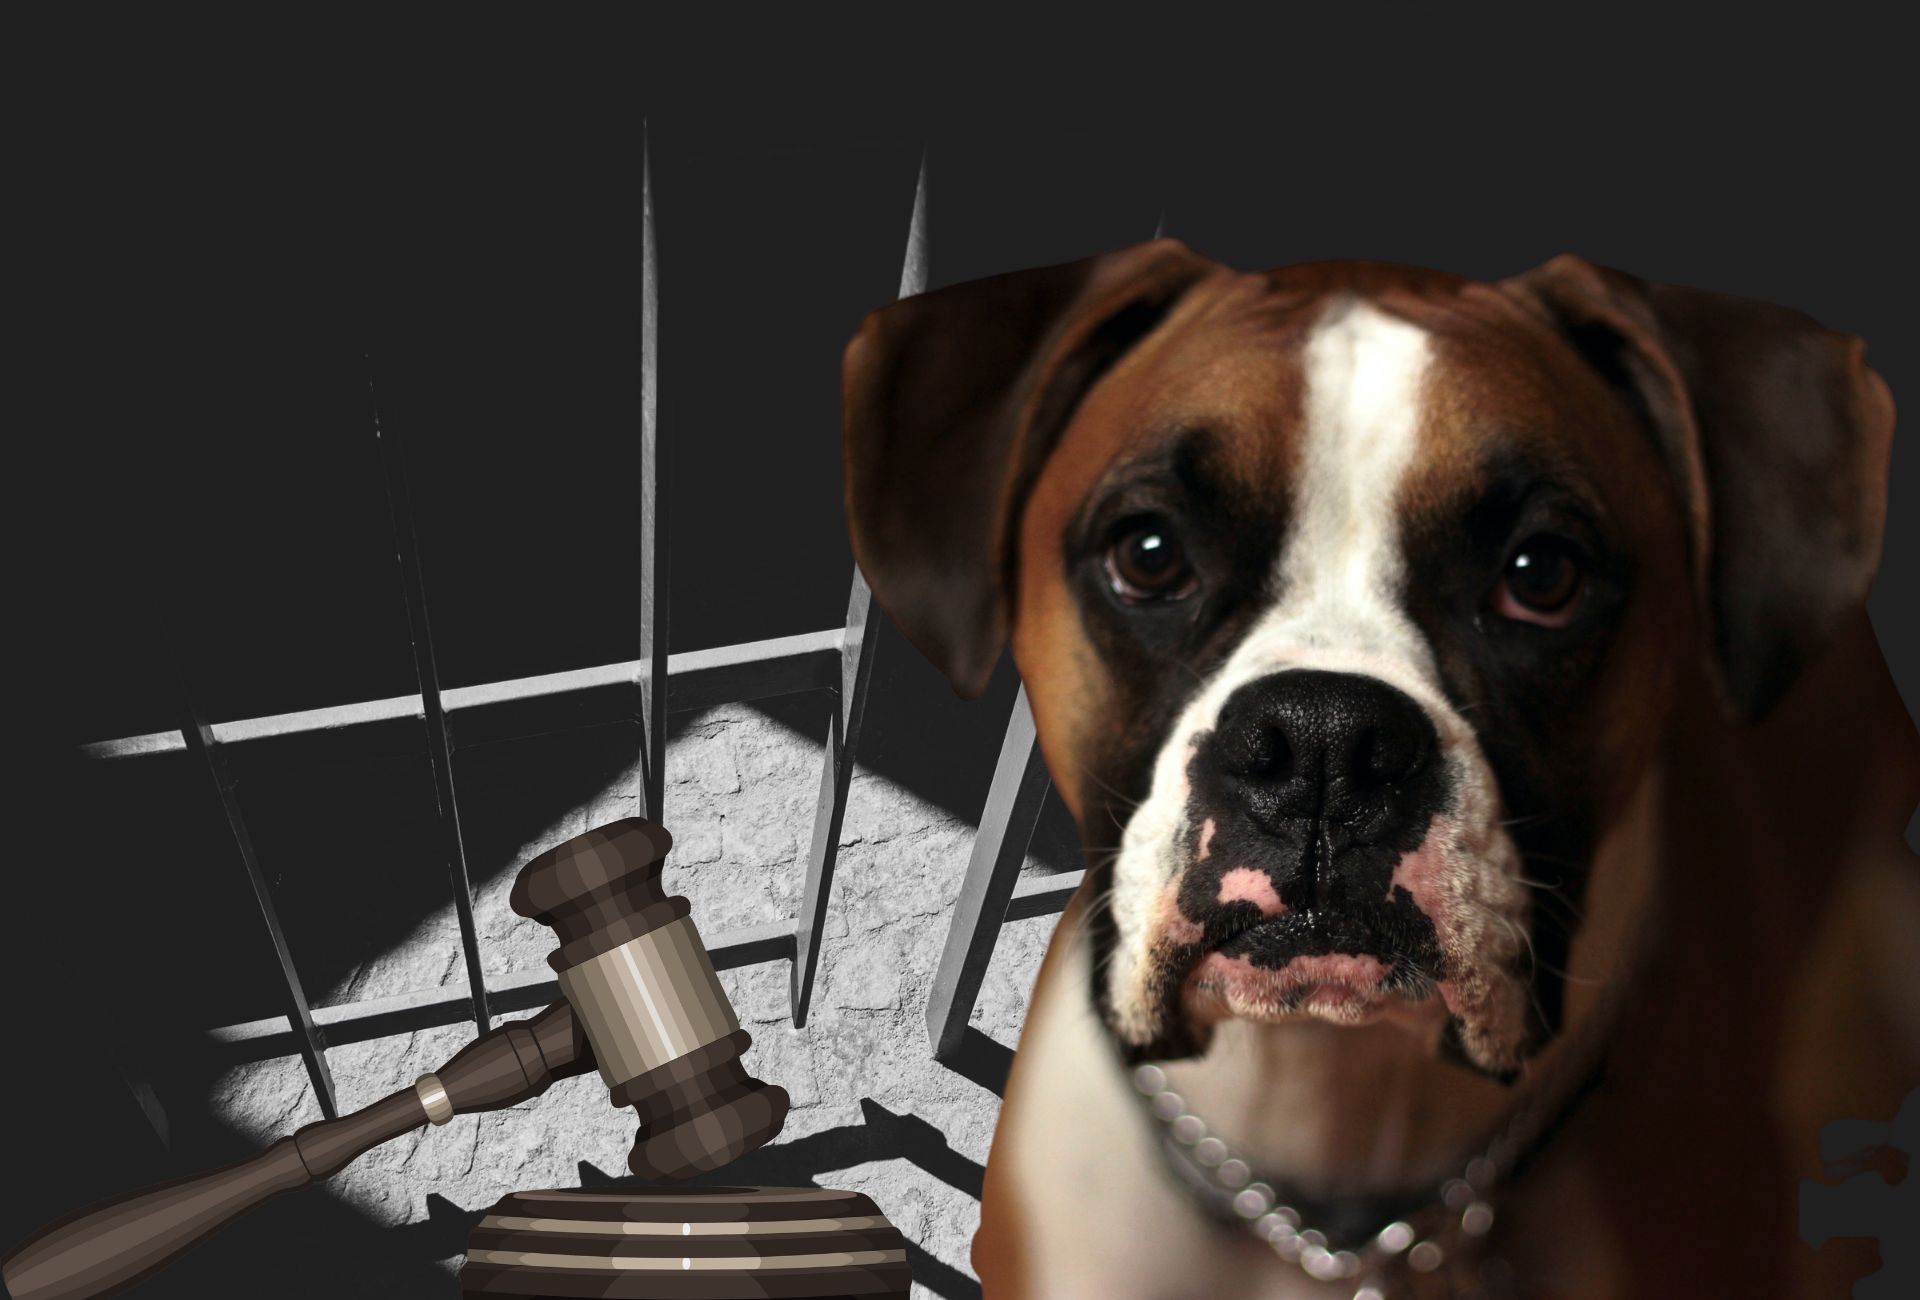 Sad Boxer dog inside a prison in black and white with an illustrated sledgehammer symbolizing the responsibility surrounding dog attacks.